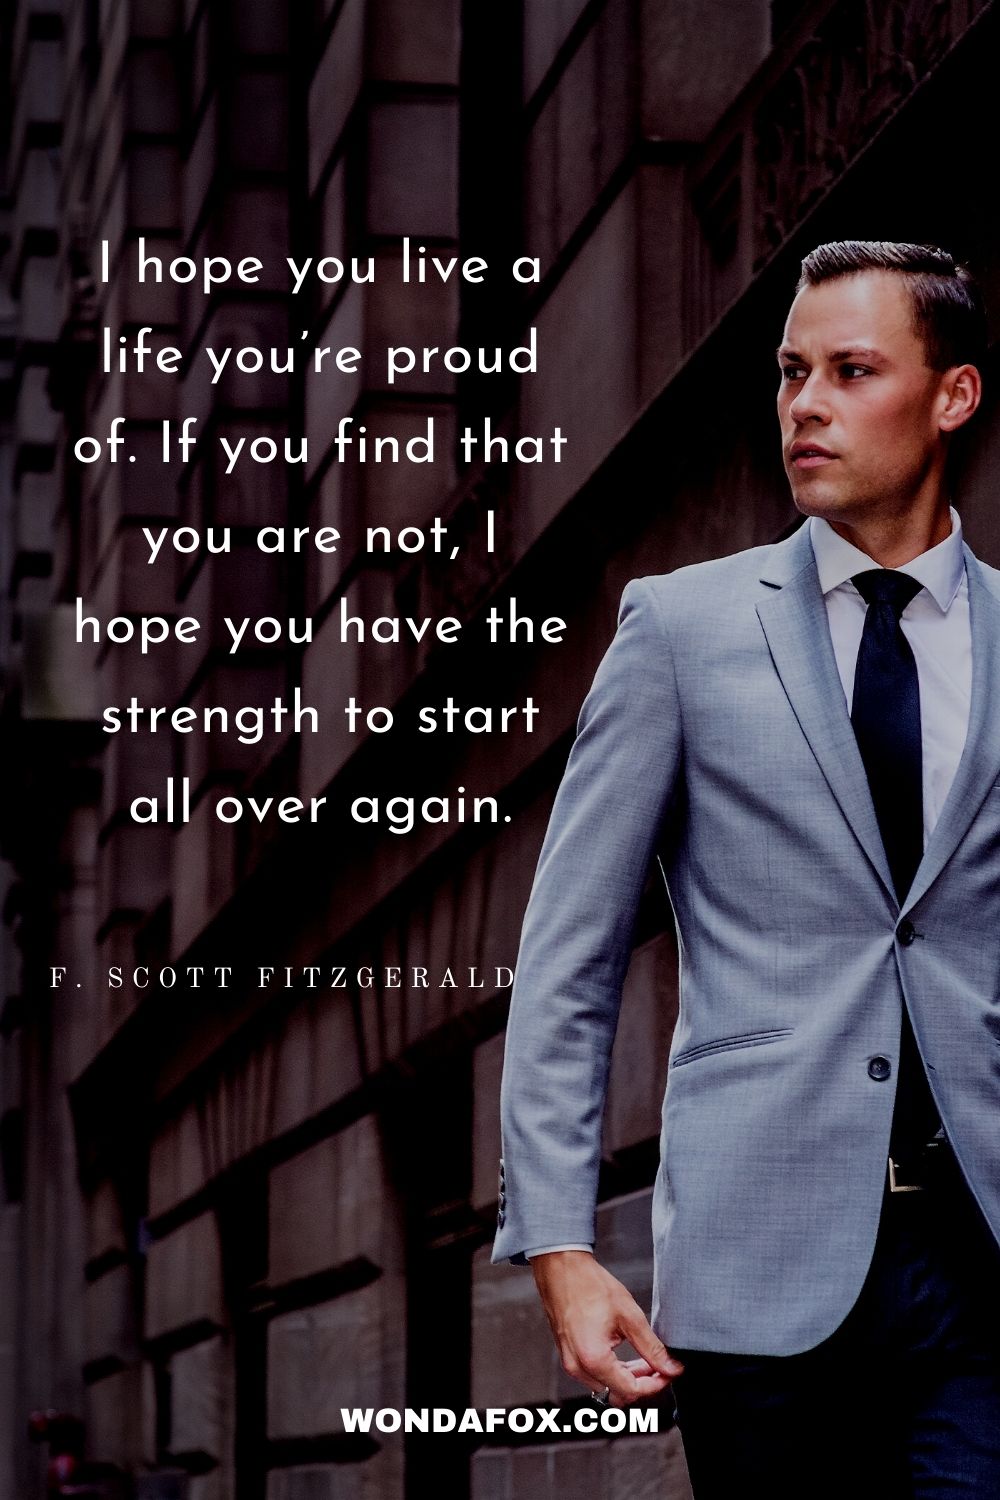 I hope you live a life you’re proud of. If you find that you are not, I hope you have the strength to start all over again.